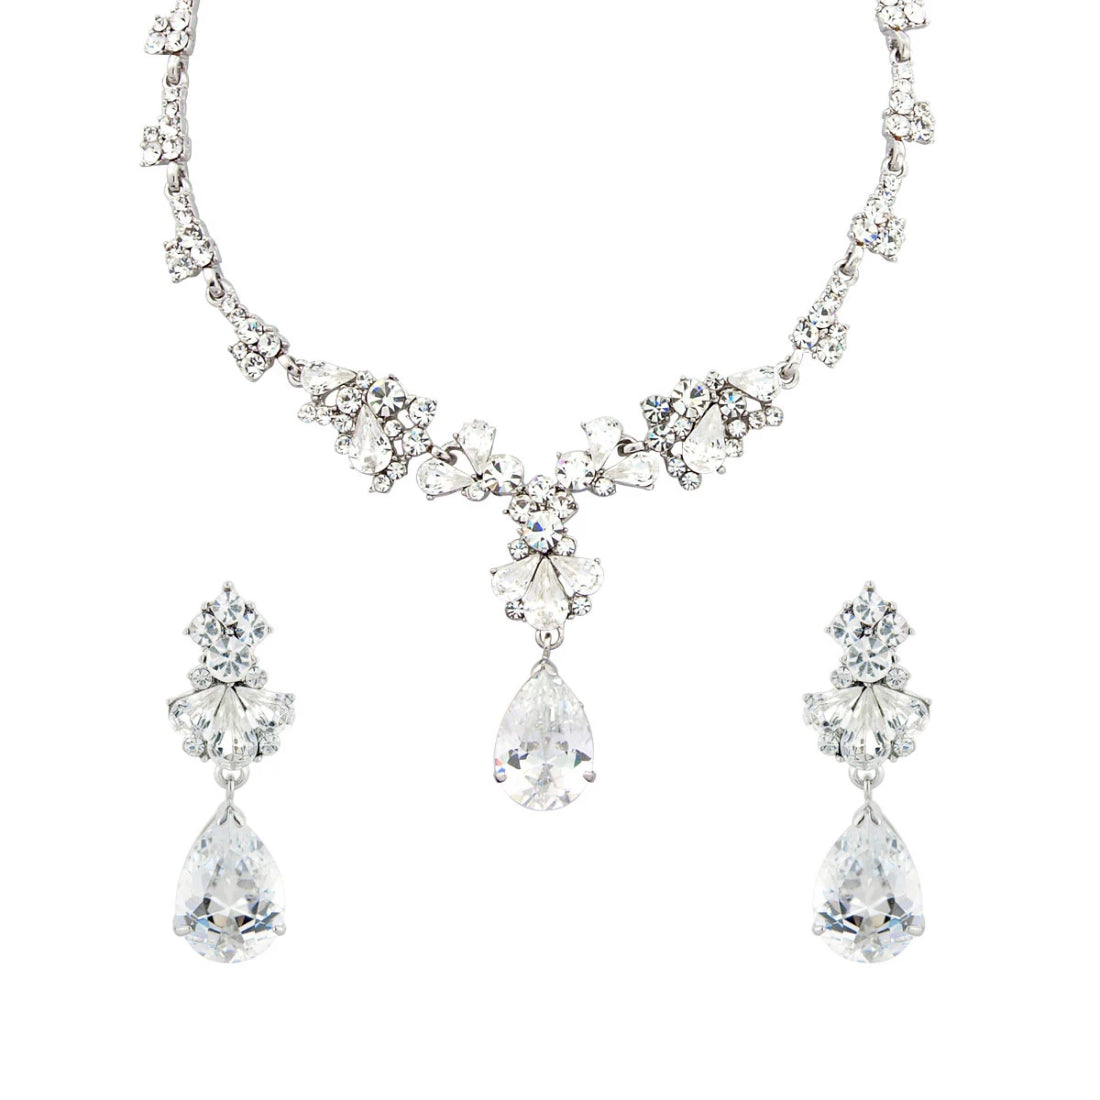 Precious Heiress Jewellery Set with clip on earrings and necklace